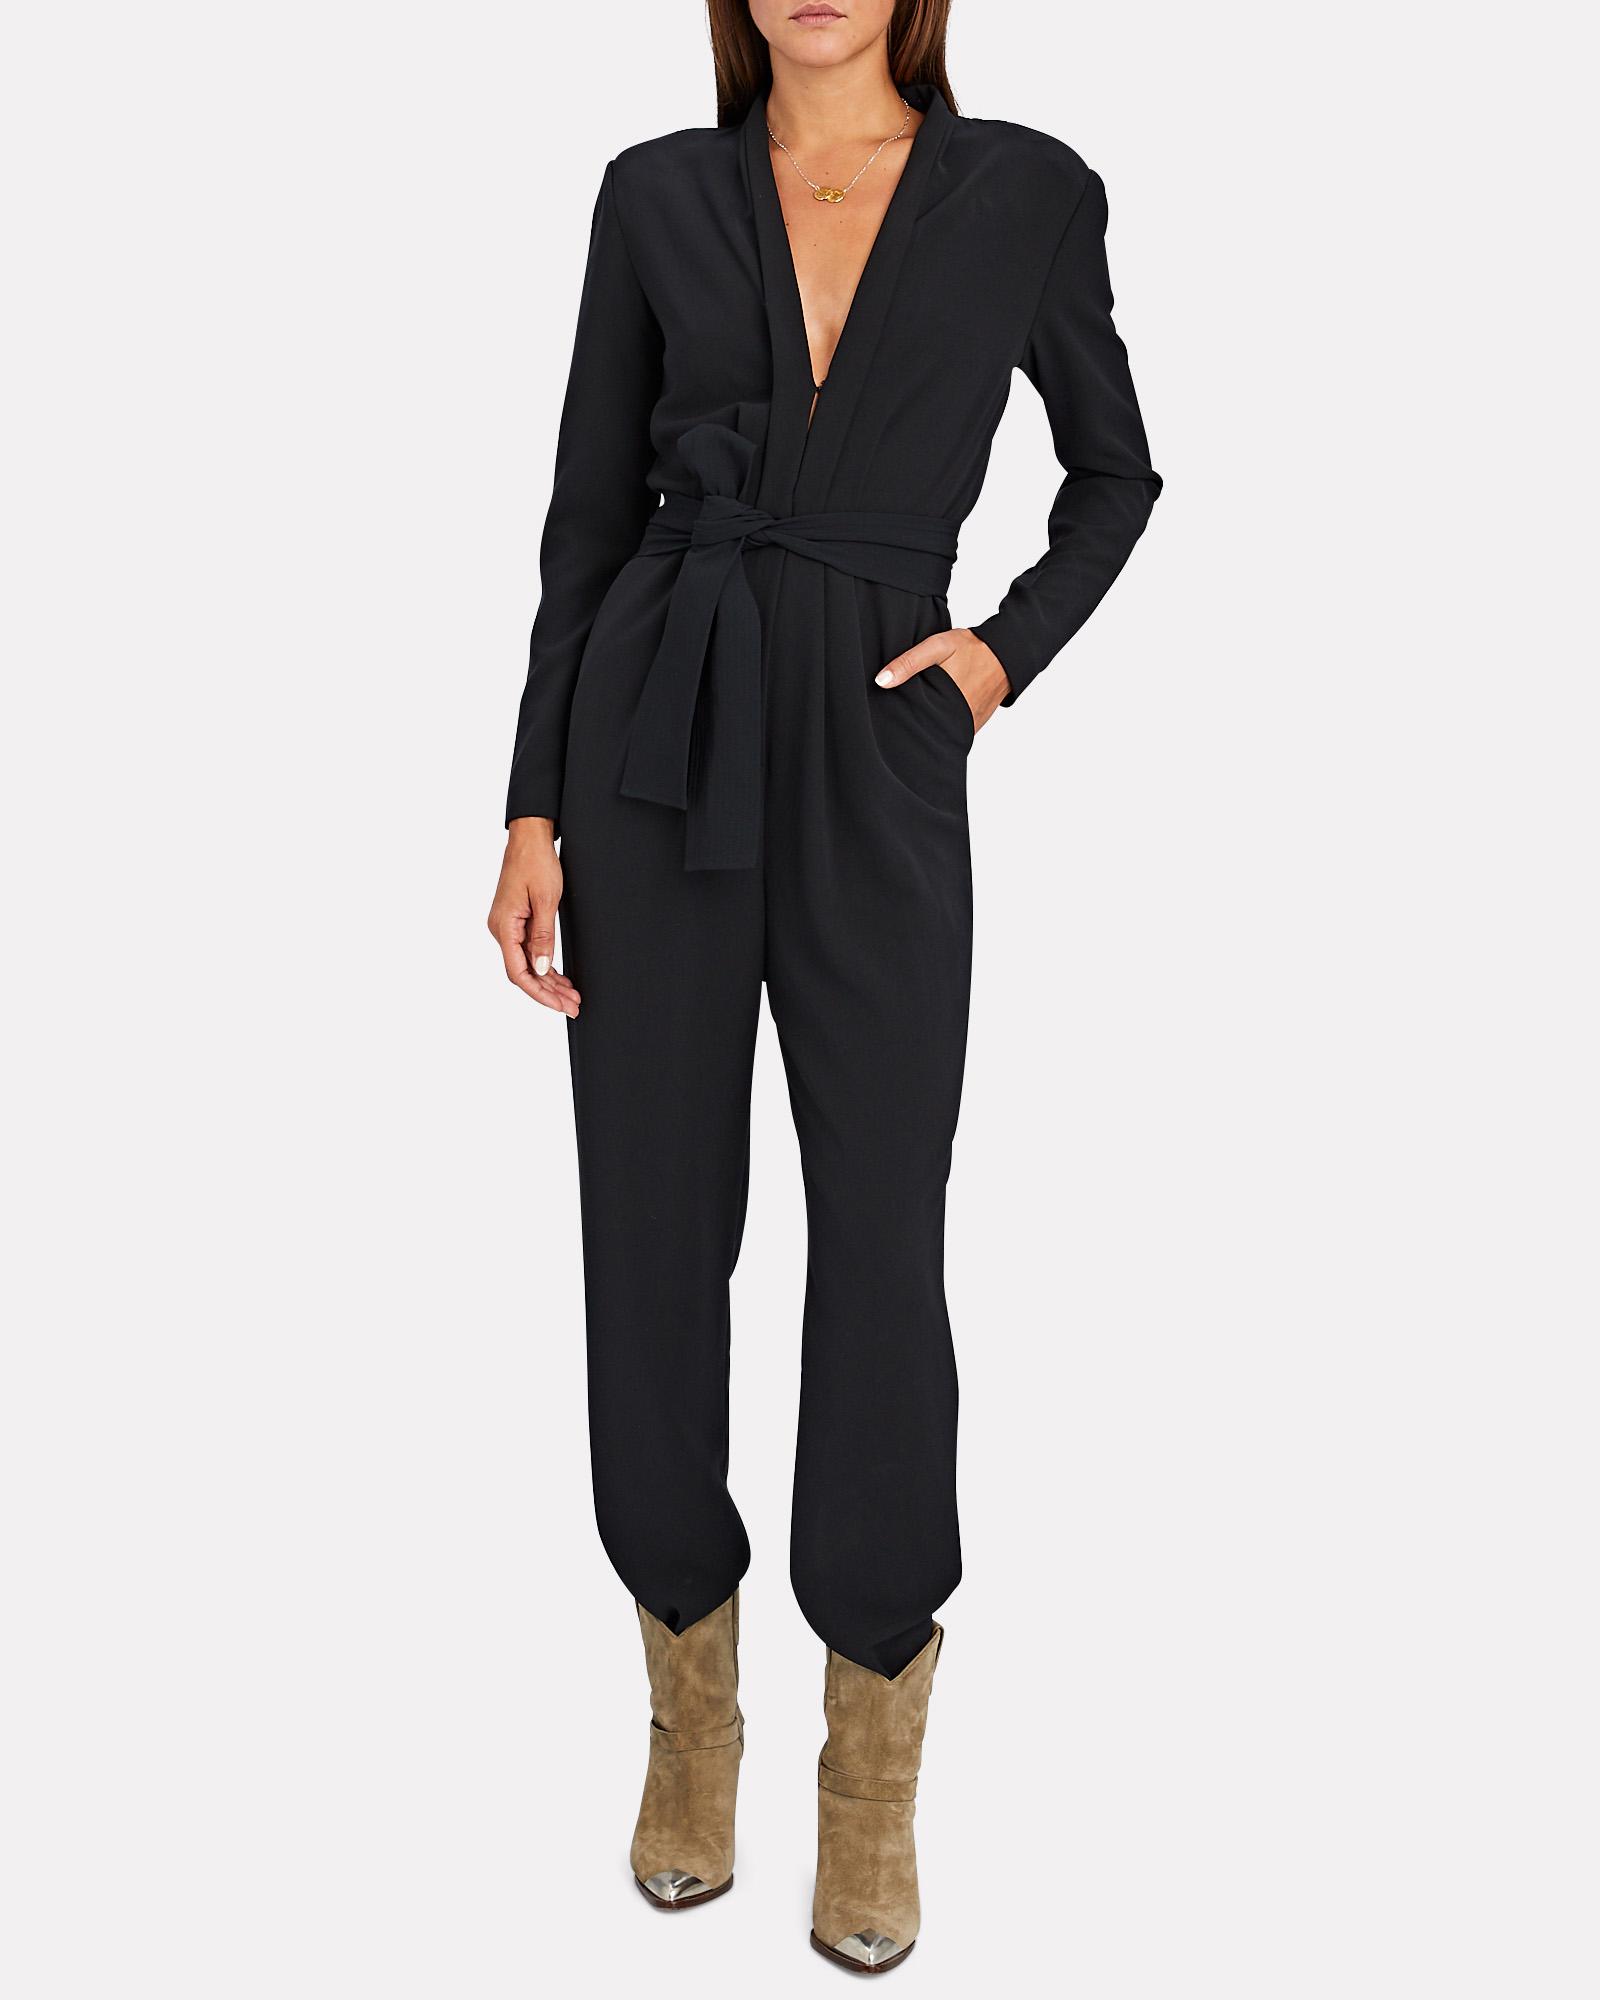 A.L.C. Synthetic Kieran Belted Crepe Jumpsuit in Black - Lyst